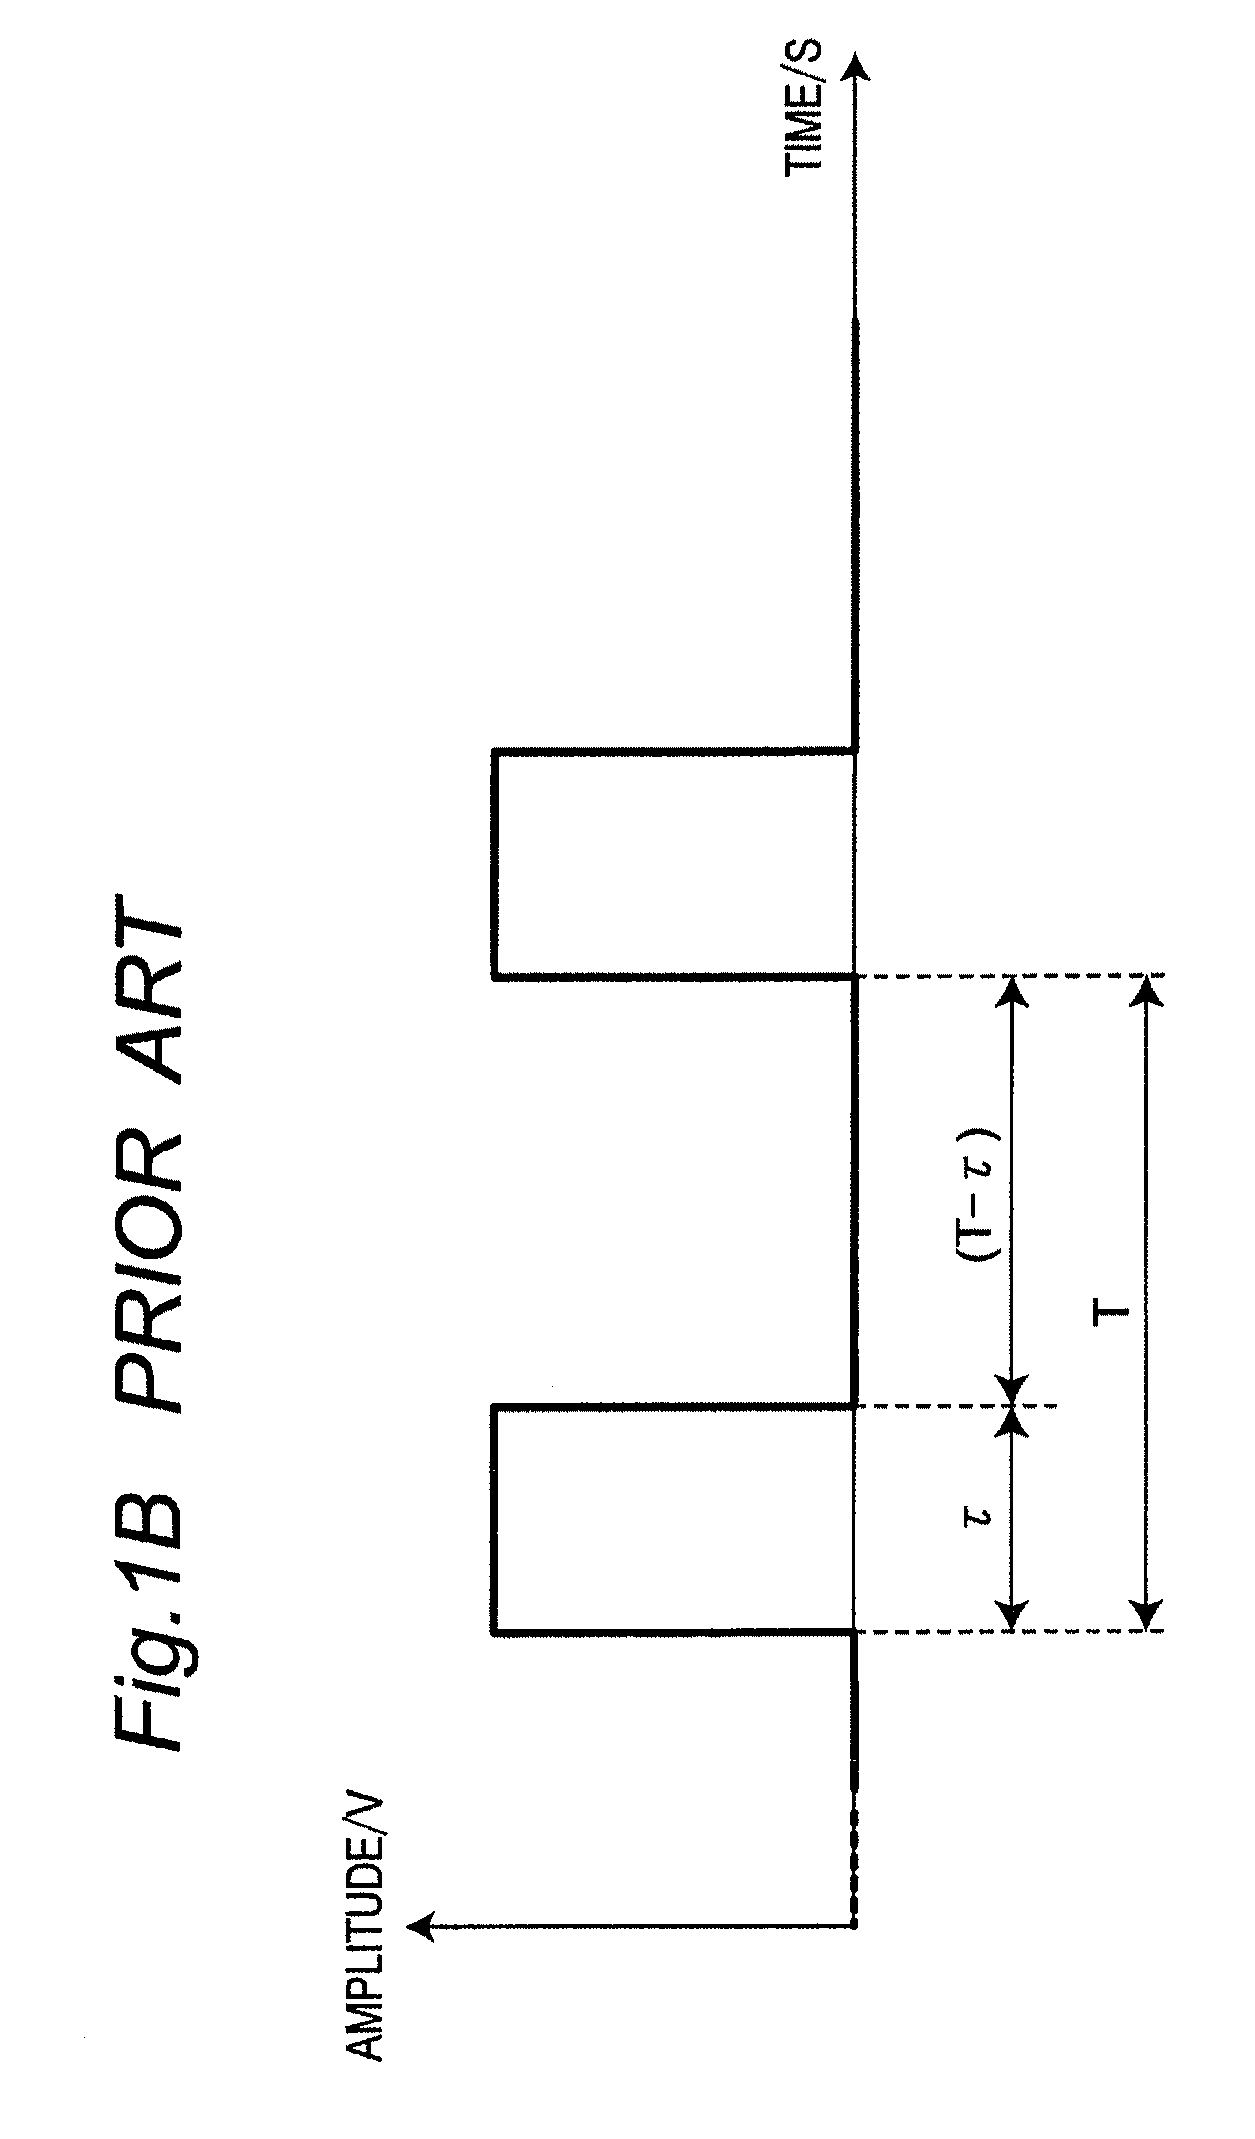 On-off timer circuit for use in dc-dc converter